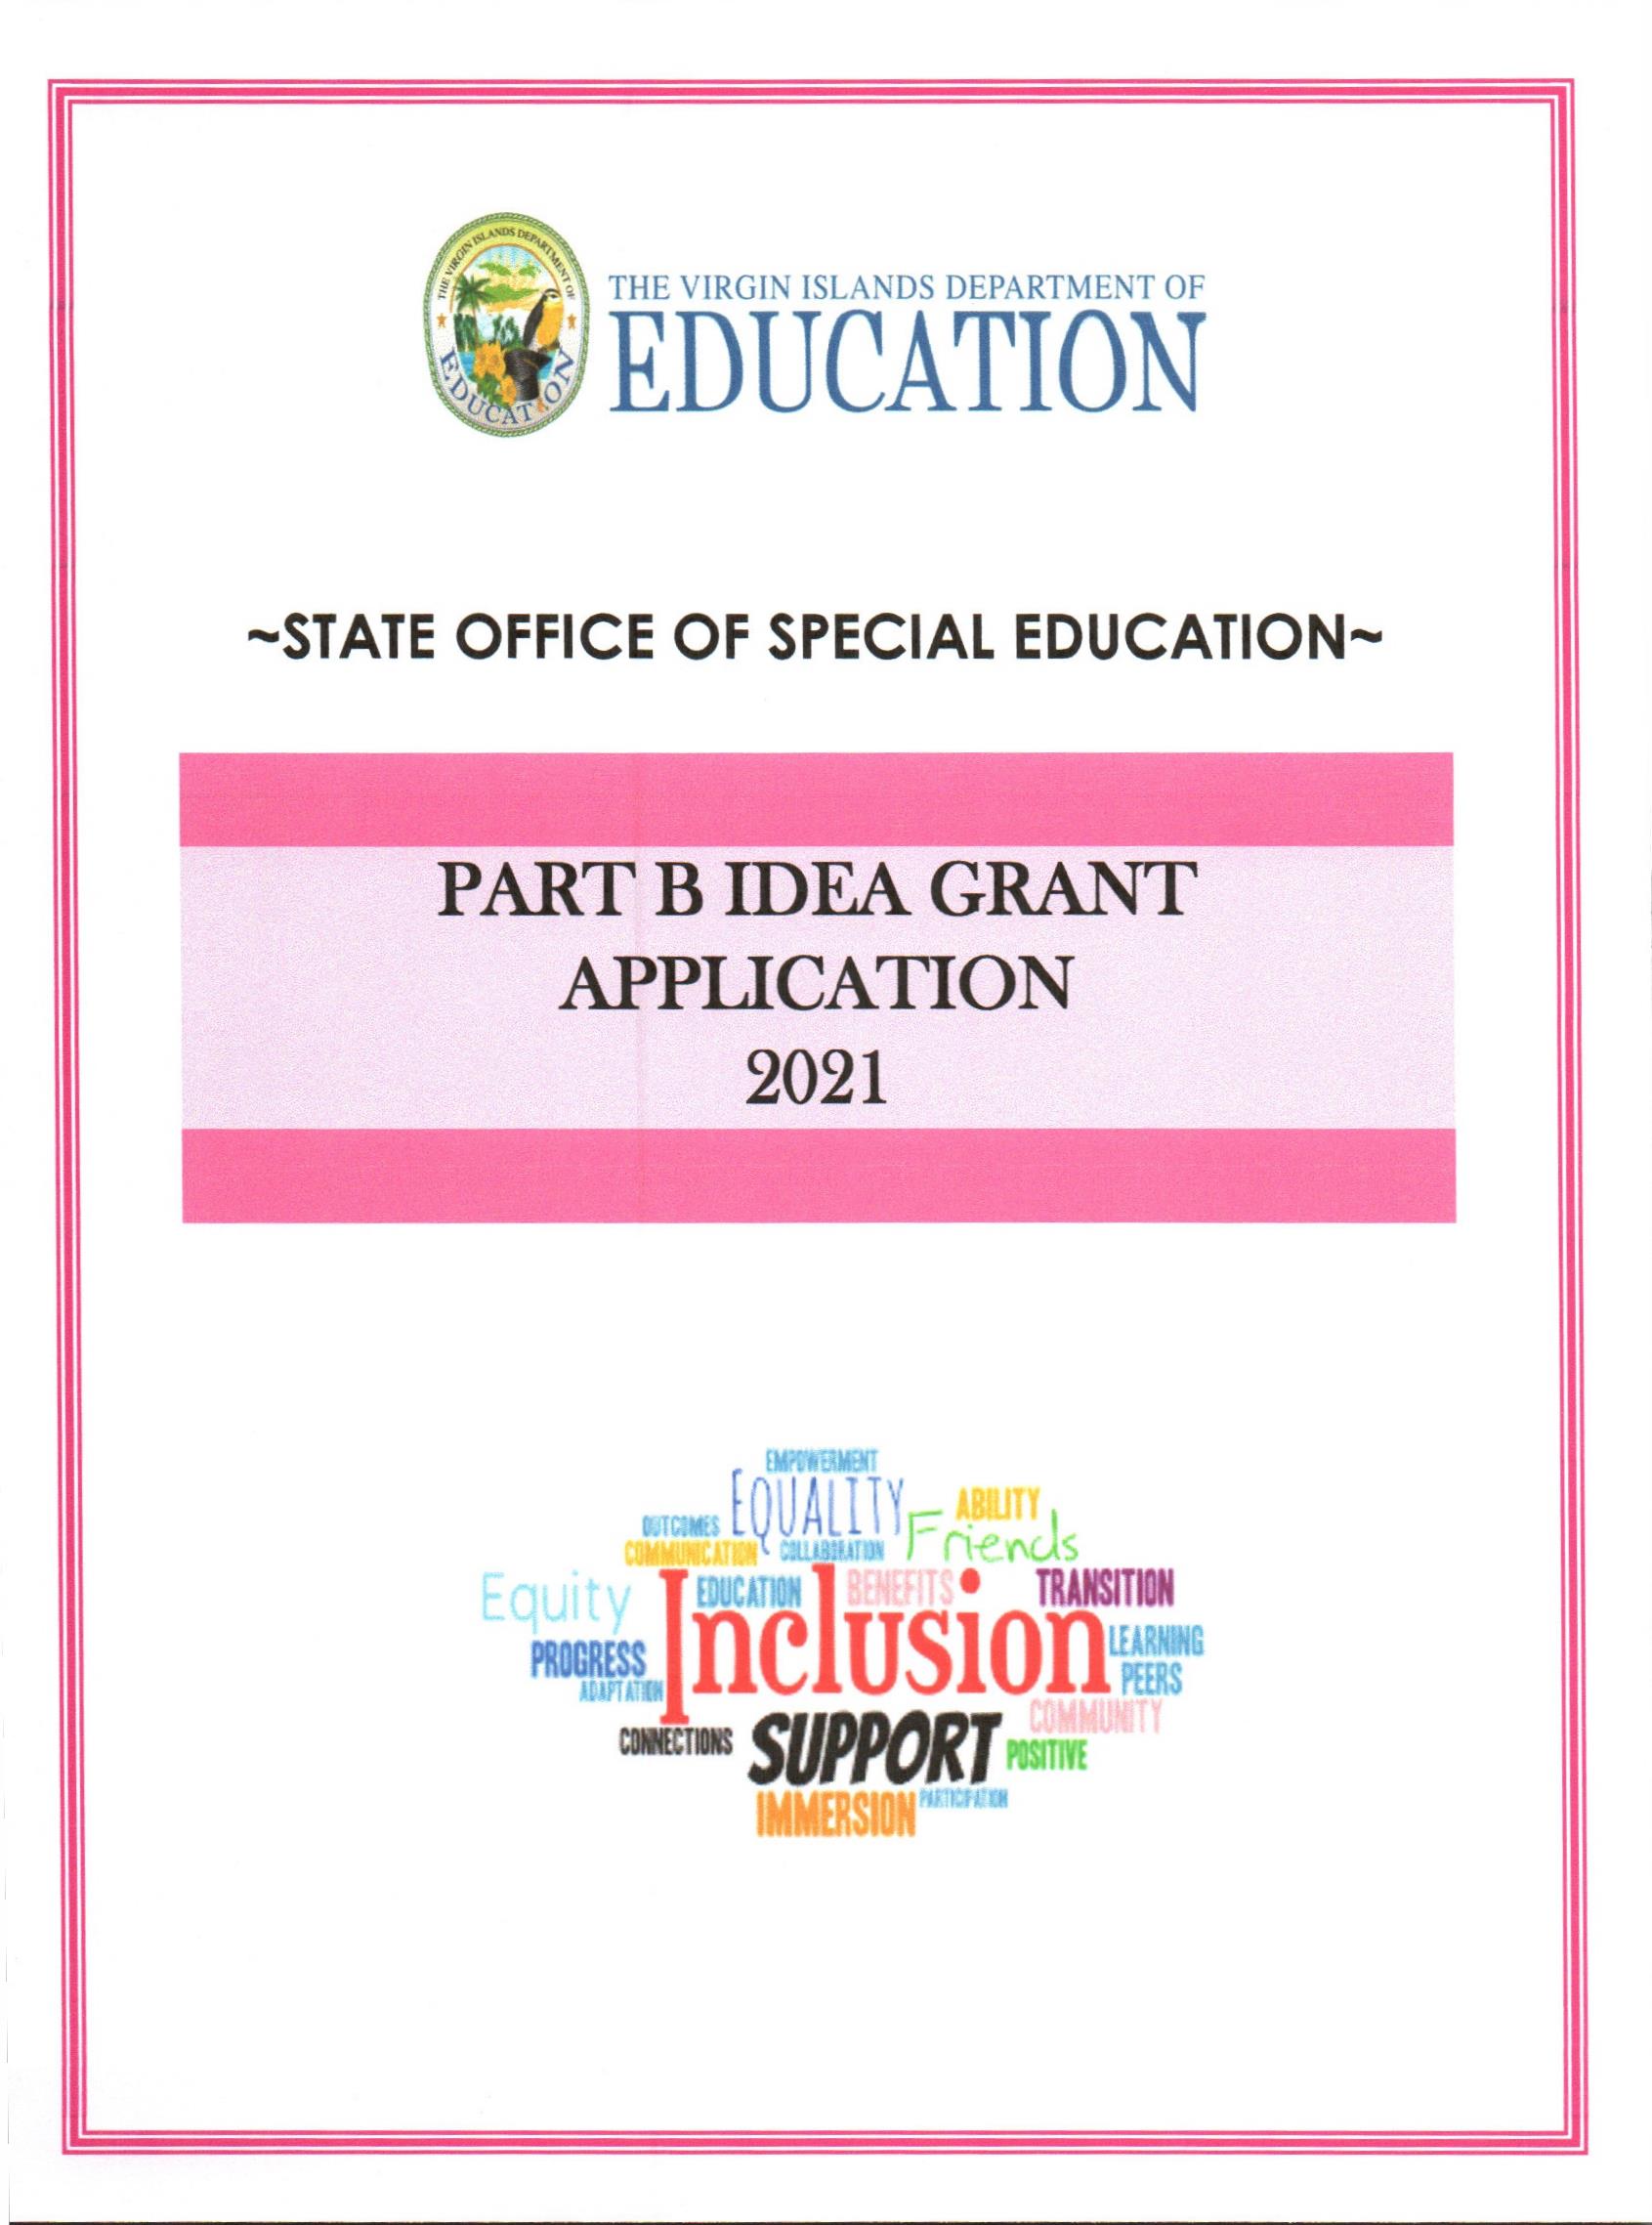 State Office of Special Education Grant Application 2021.jpg